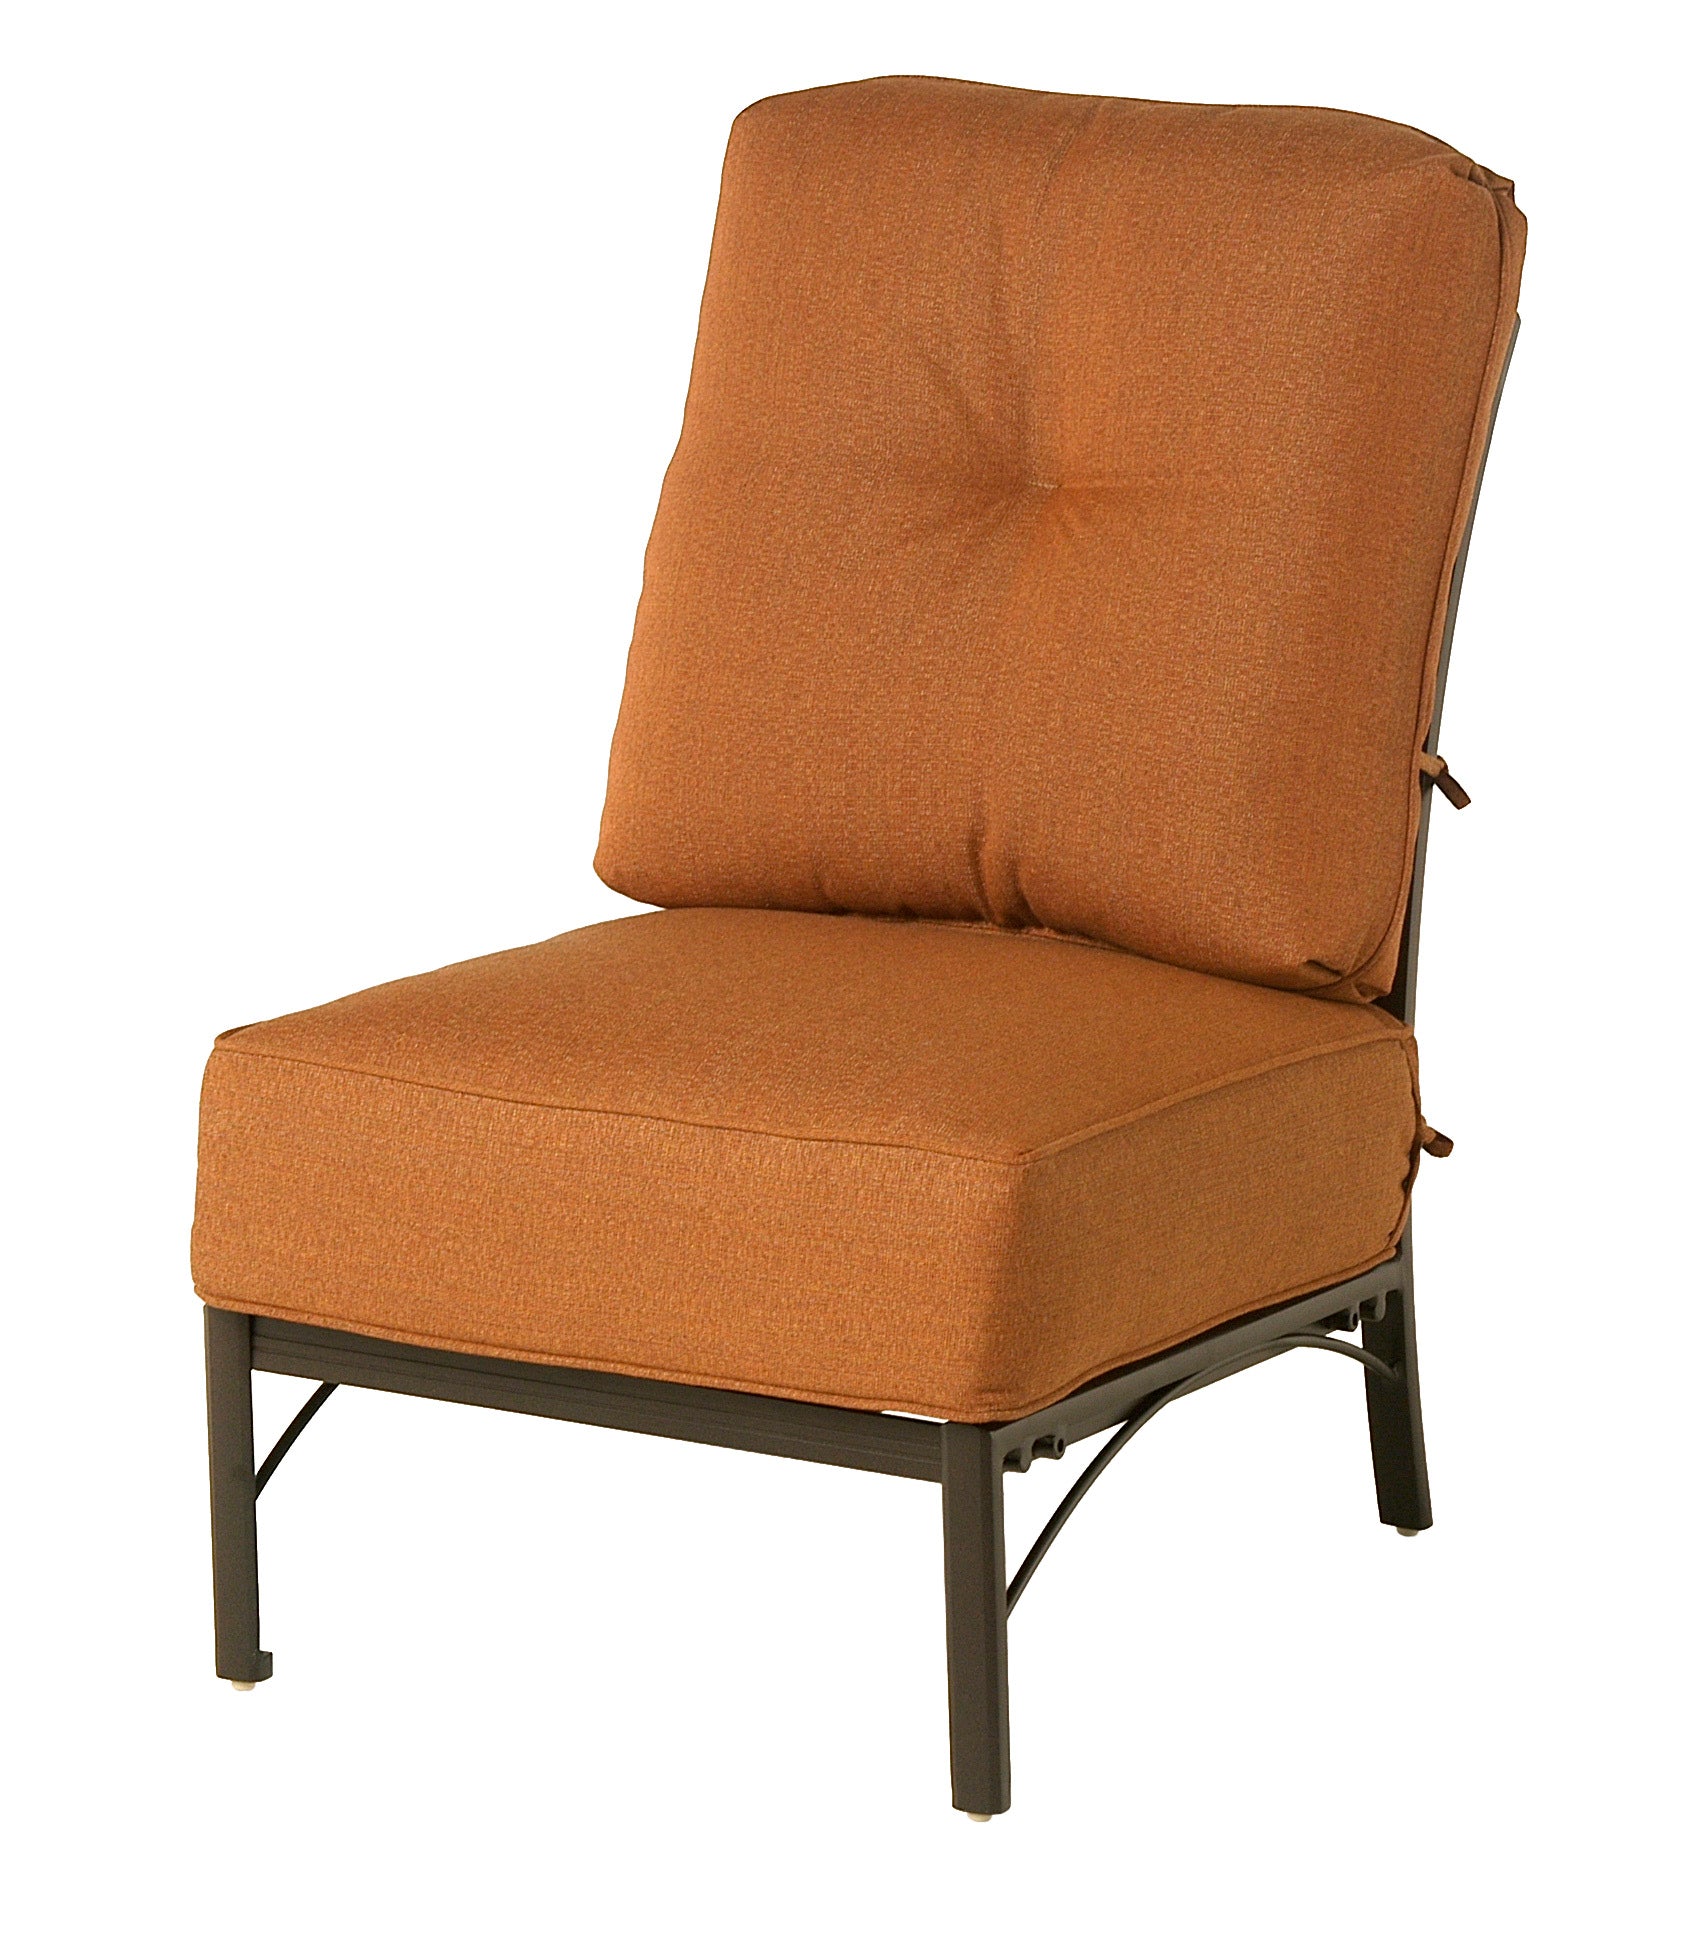 Stratford Estate Club Middle Chair with cushion